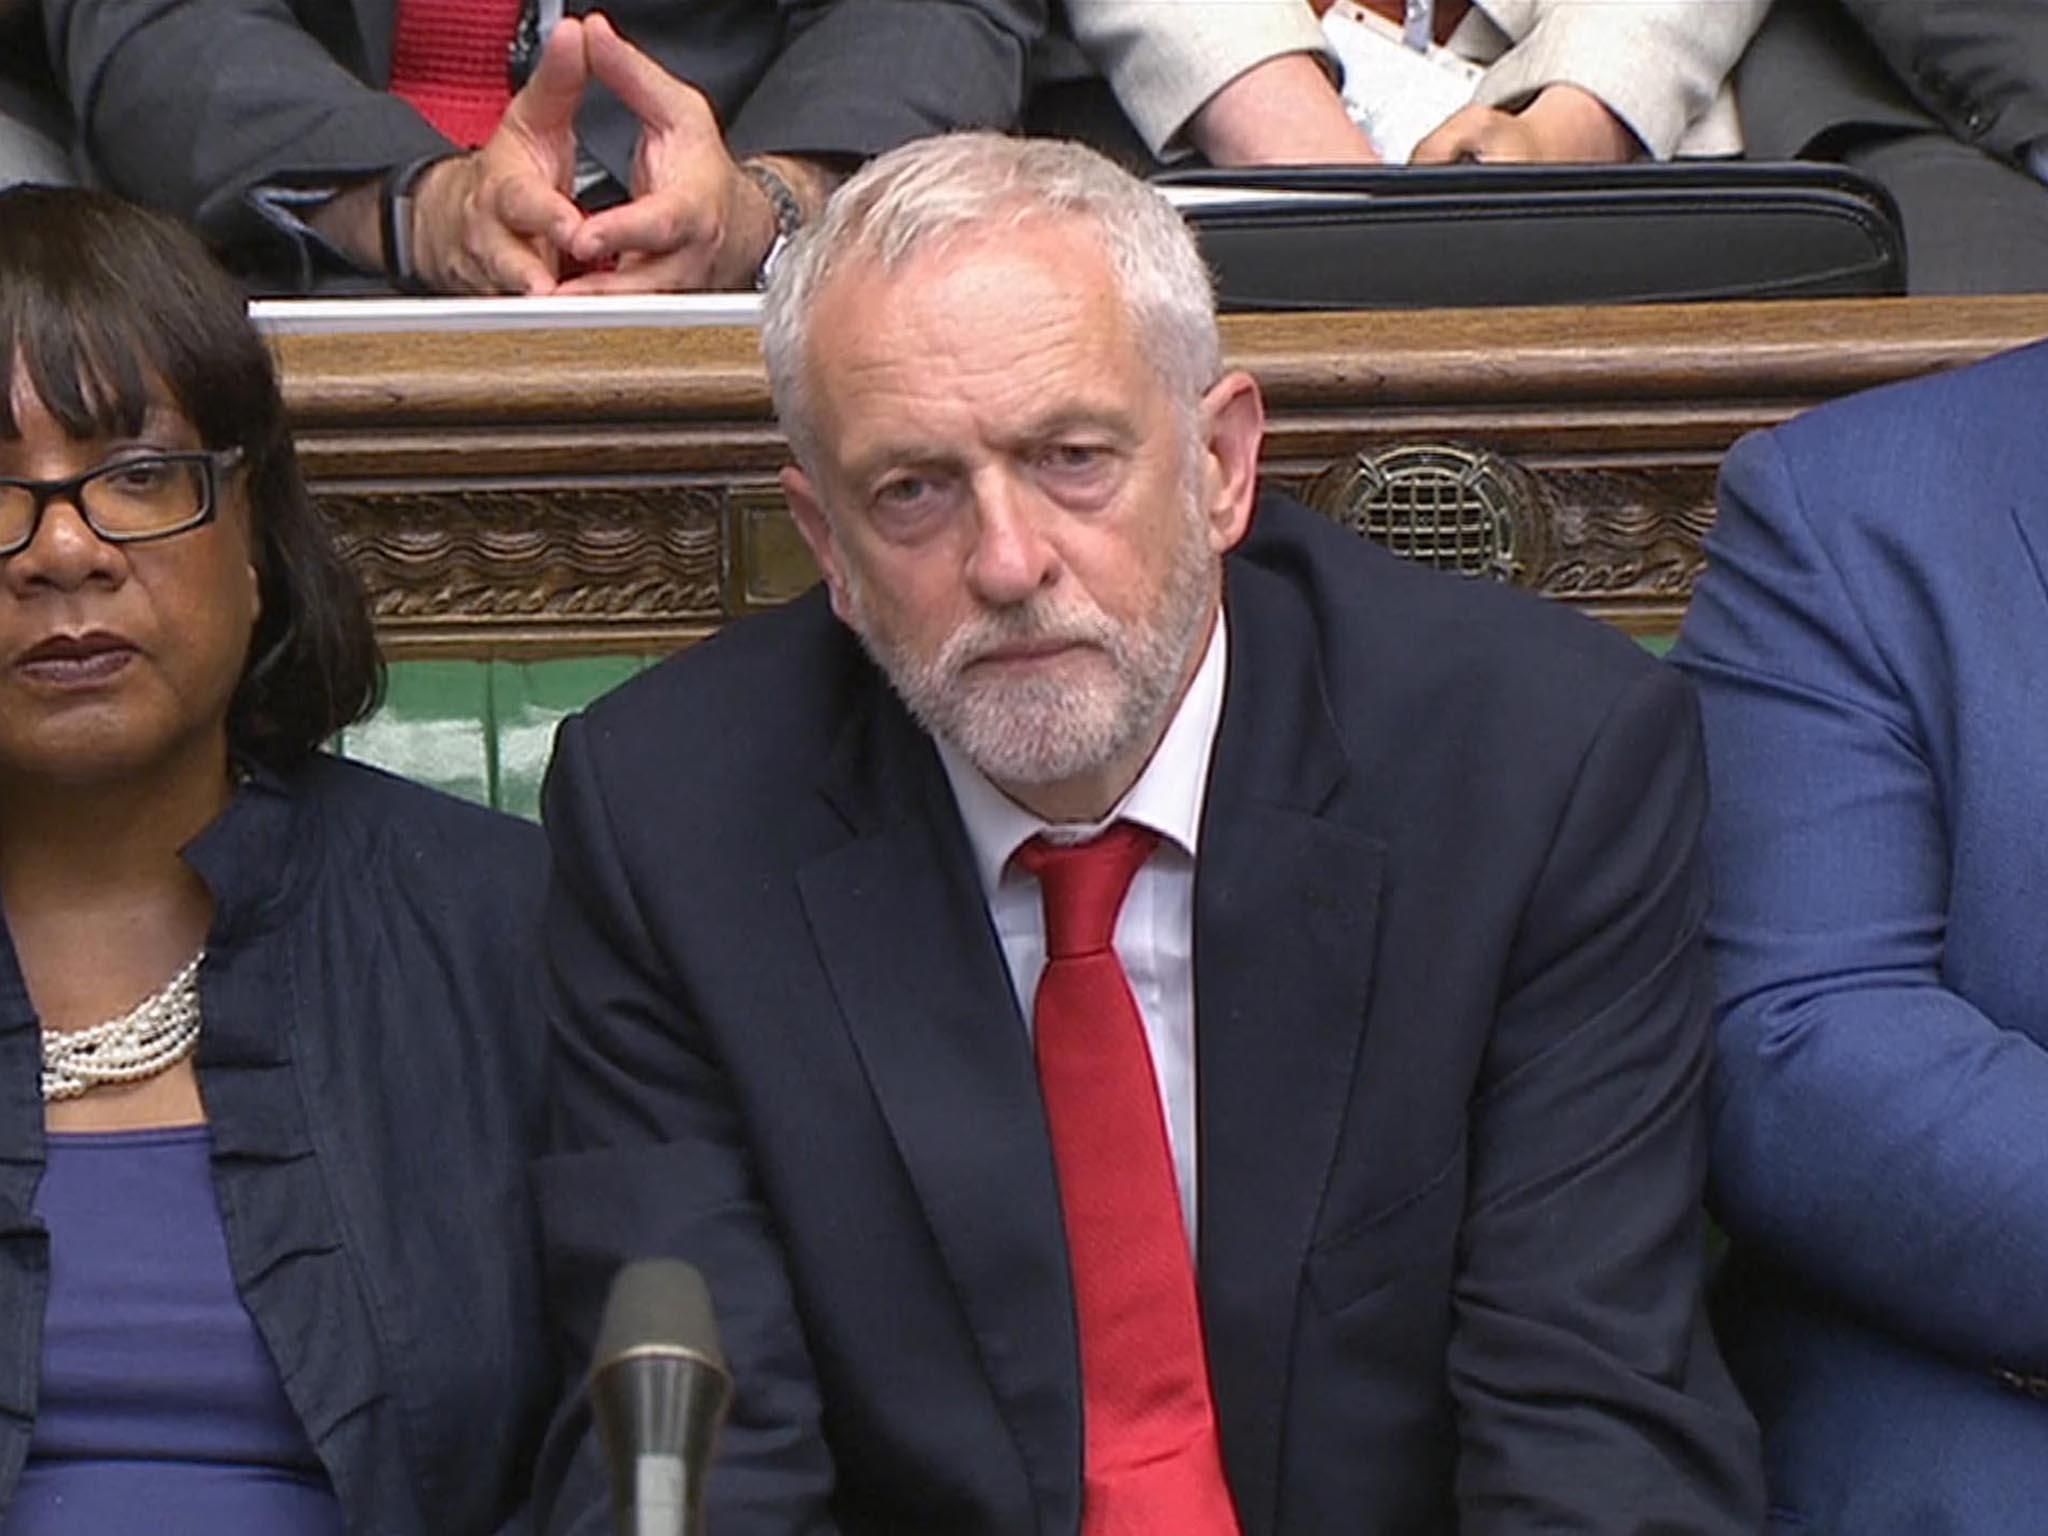 The Labour leader finally looks like someone who could lead the country